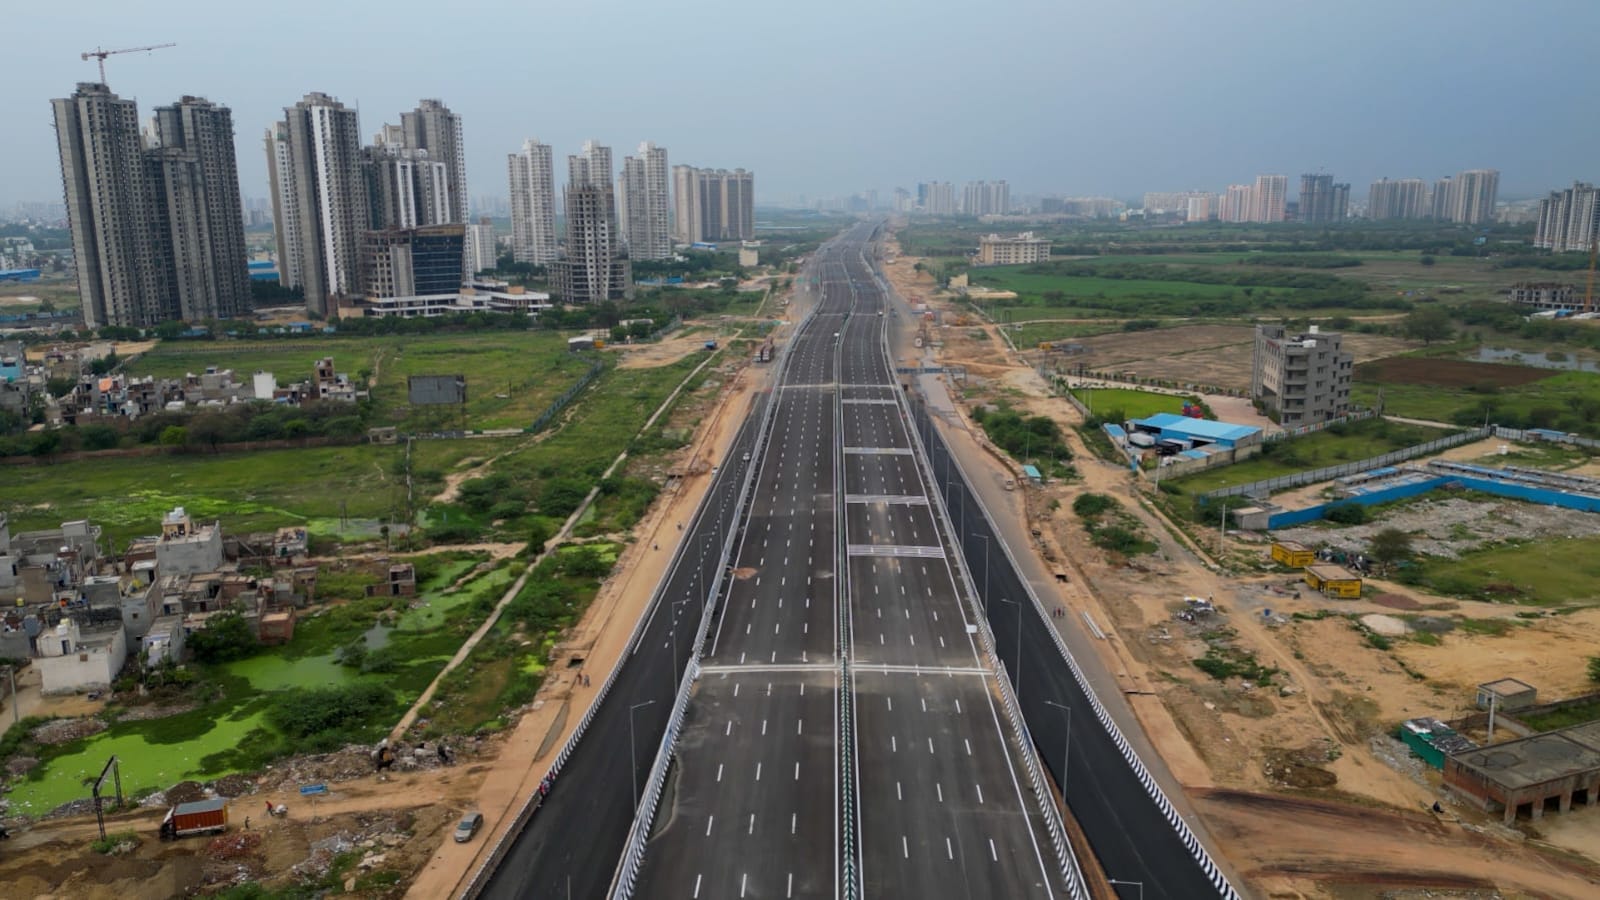 Dwarka Expressway: A Marvel of Engineering to be Operational in December 2023, Says Nitin Gadkari